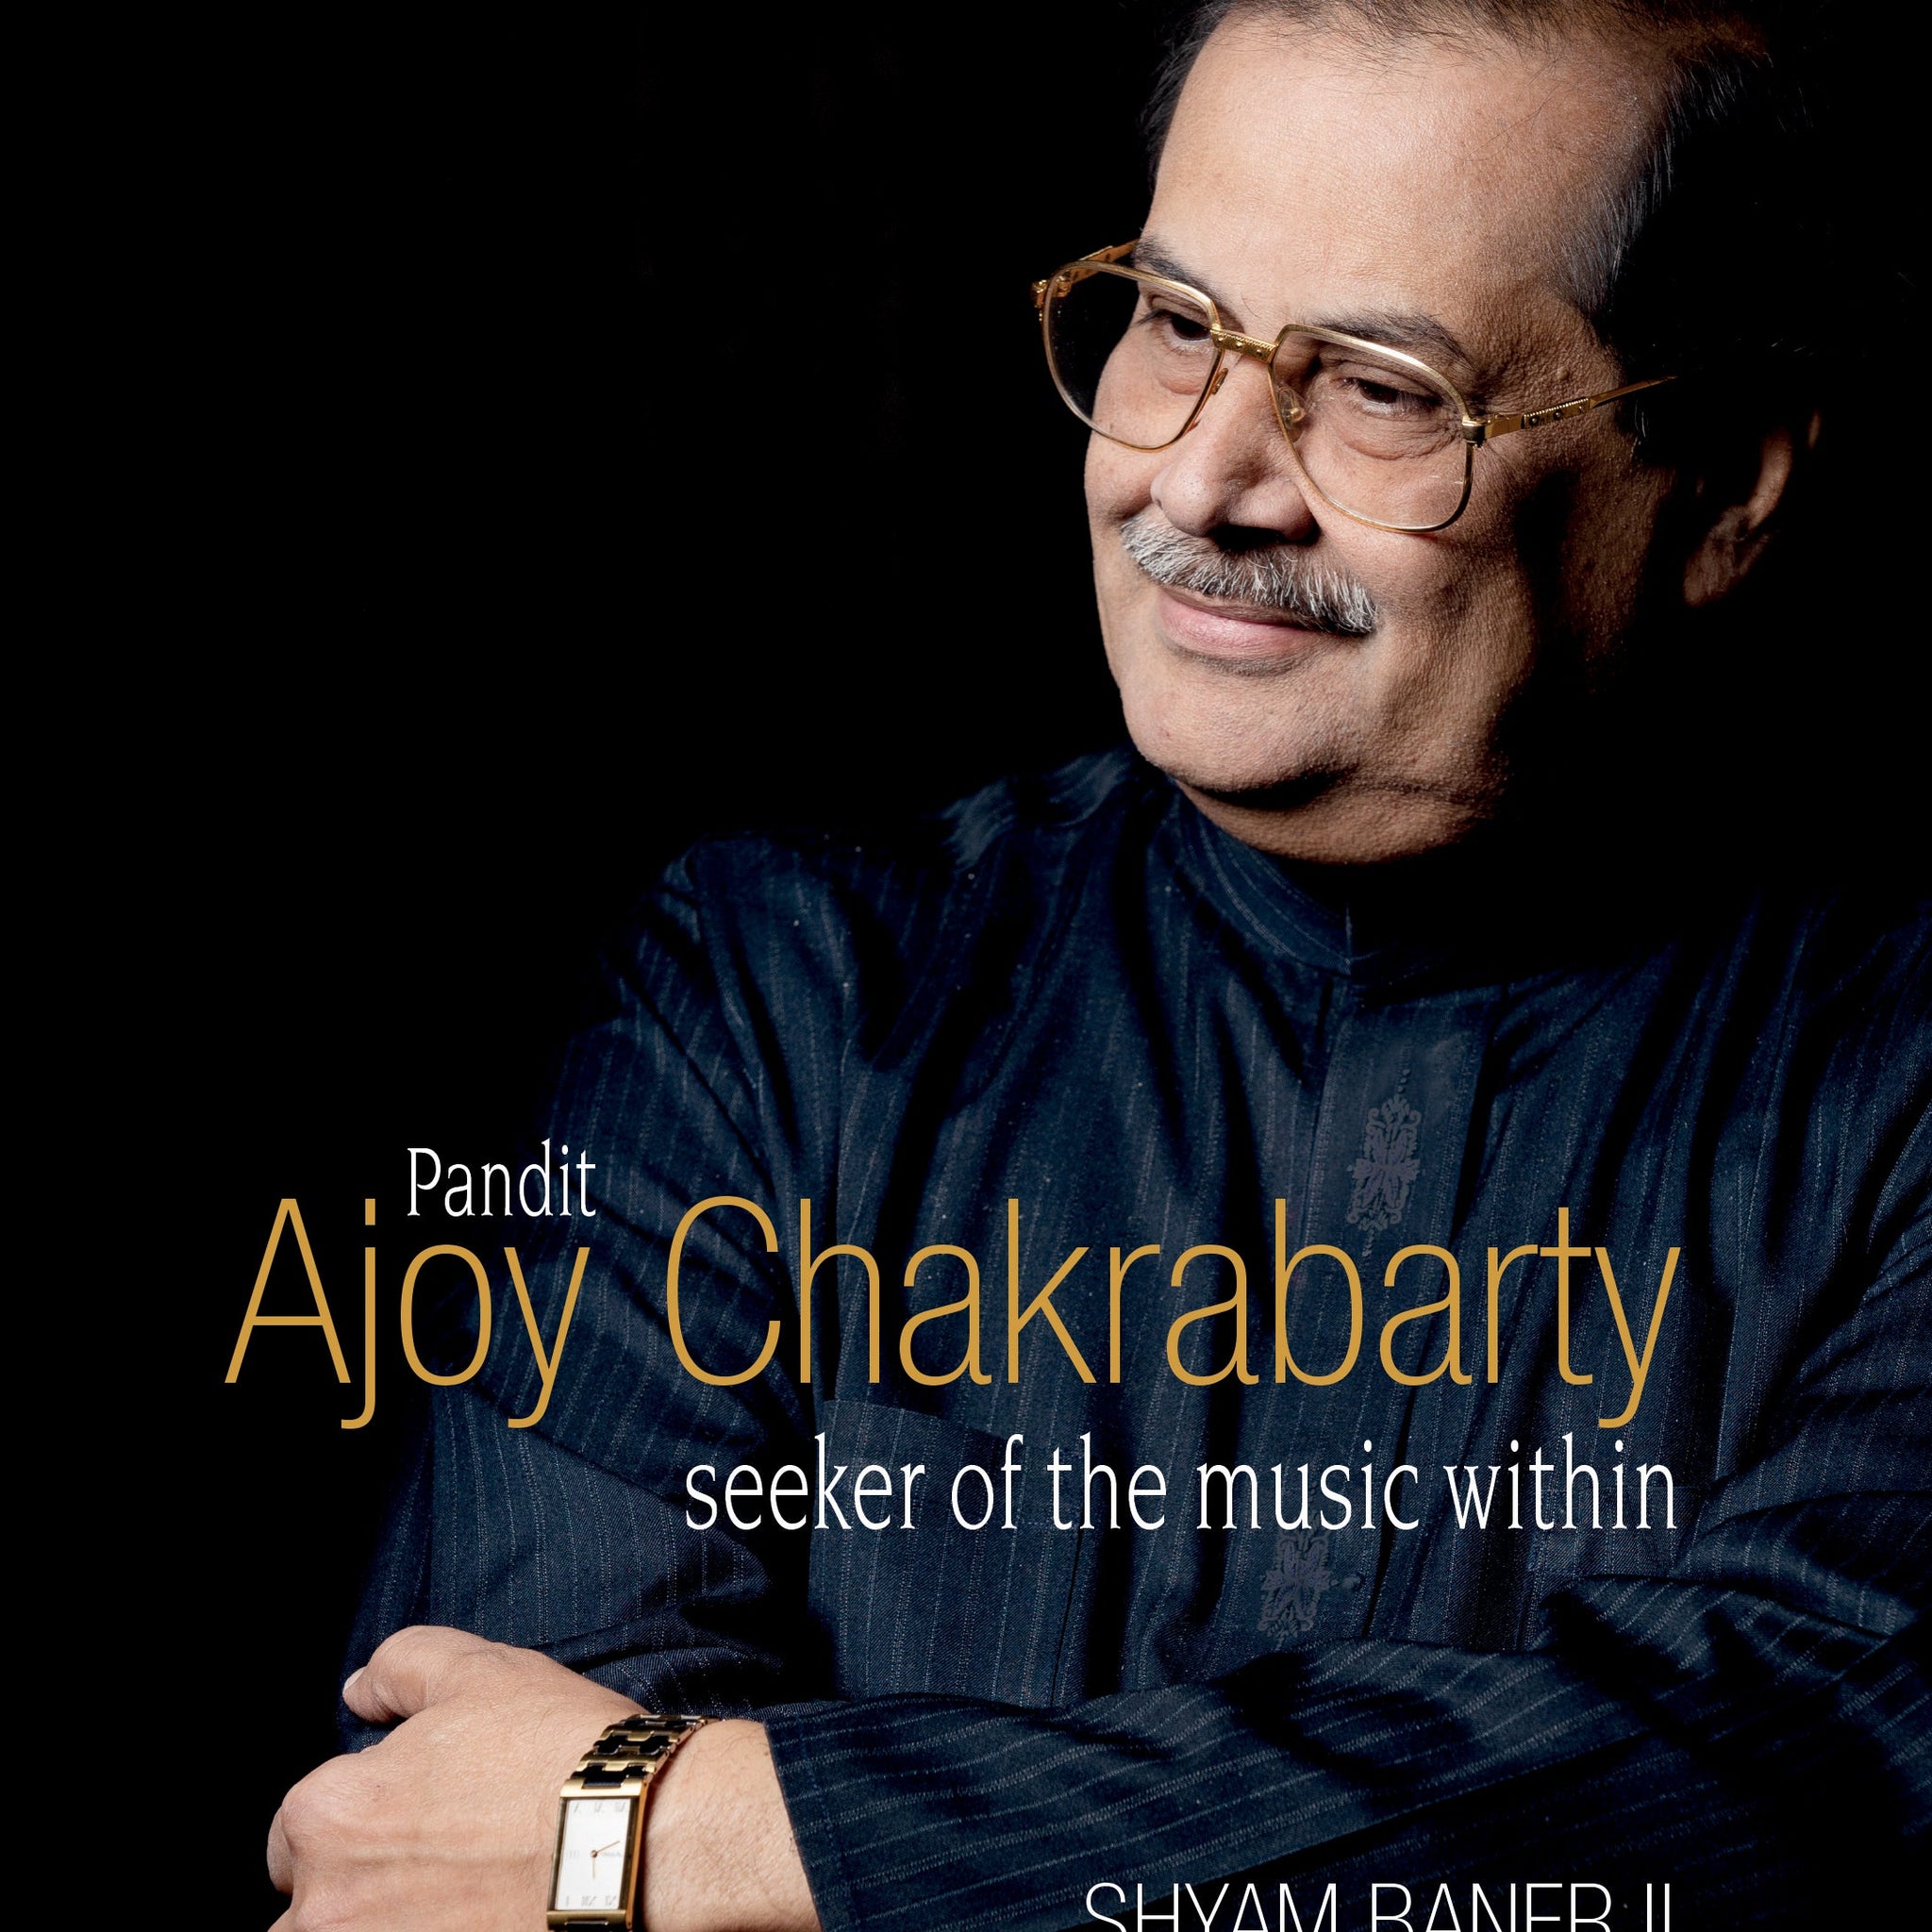 Pandit Ajoy Chakrabarty: Seeker of the music within (H.B)